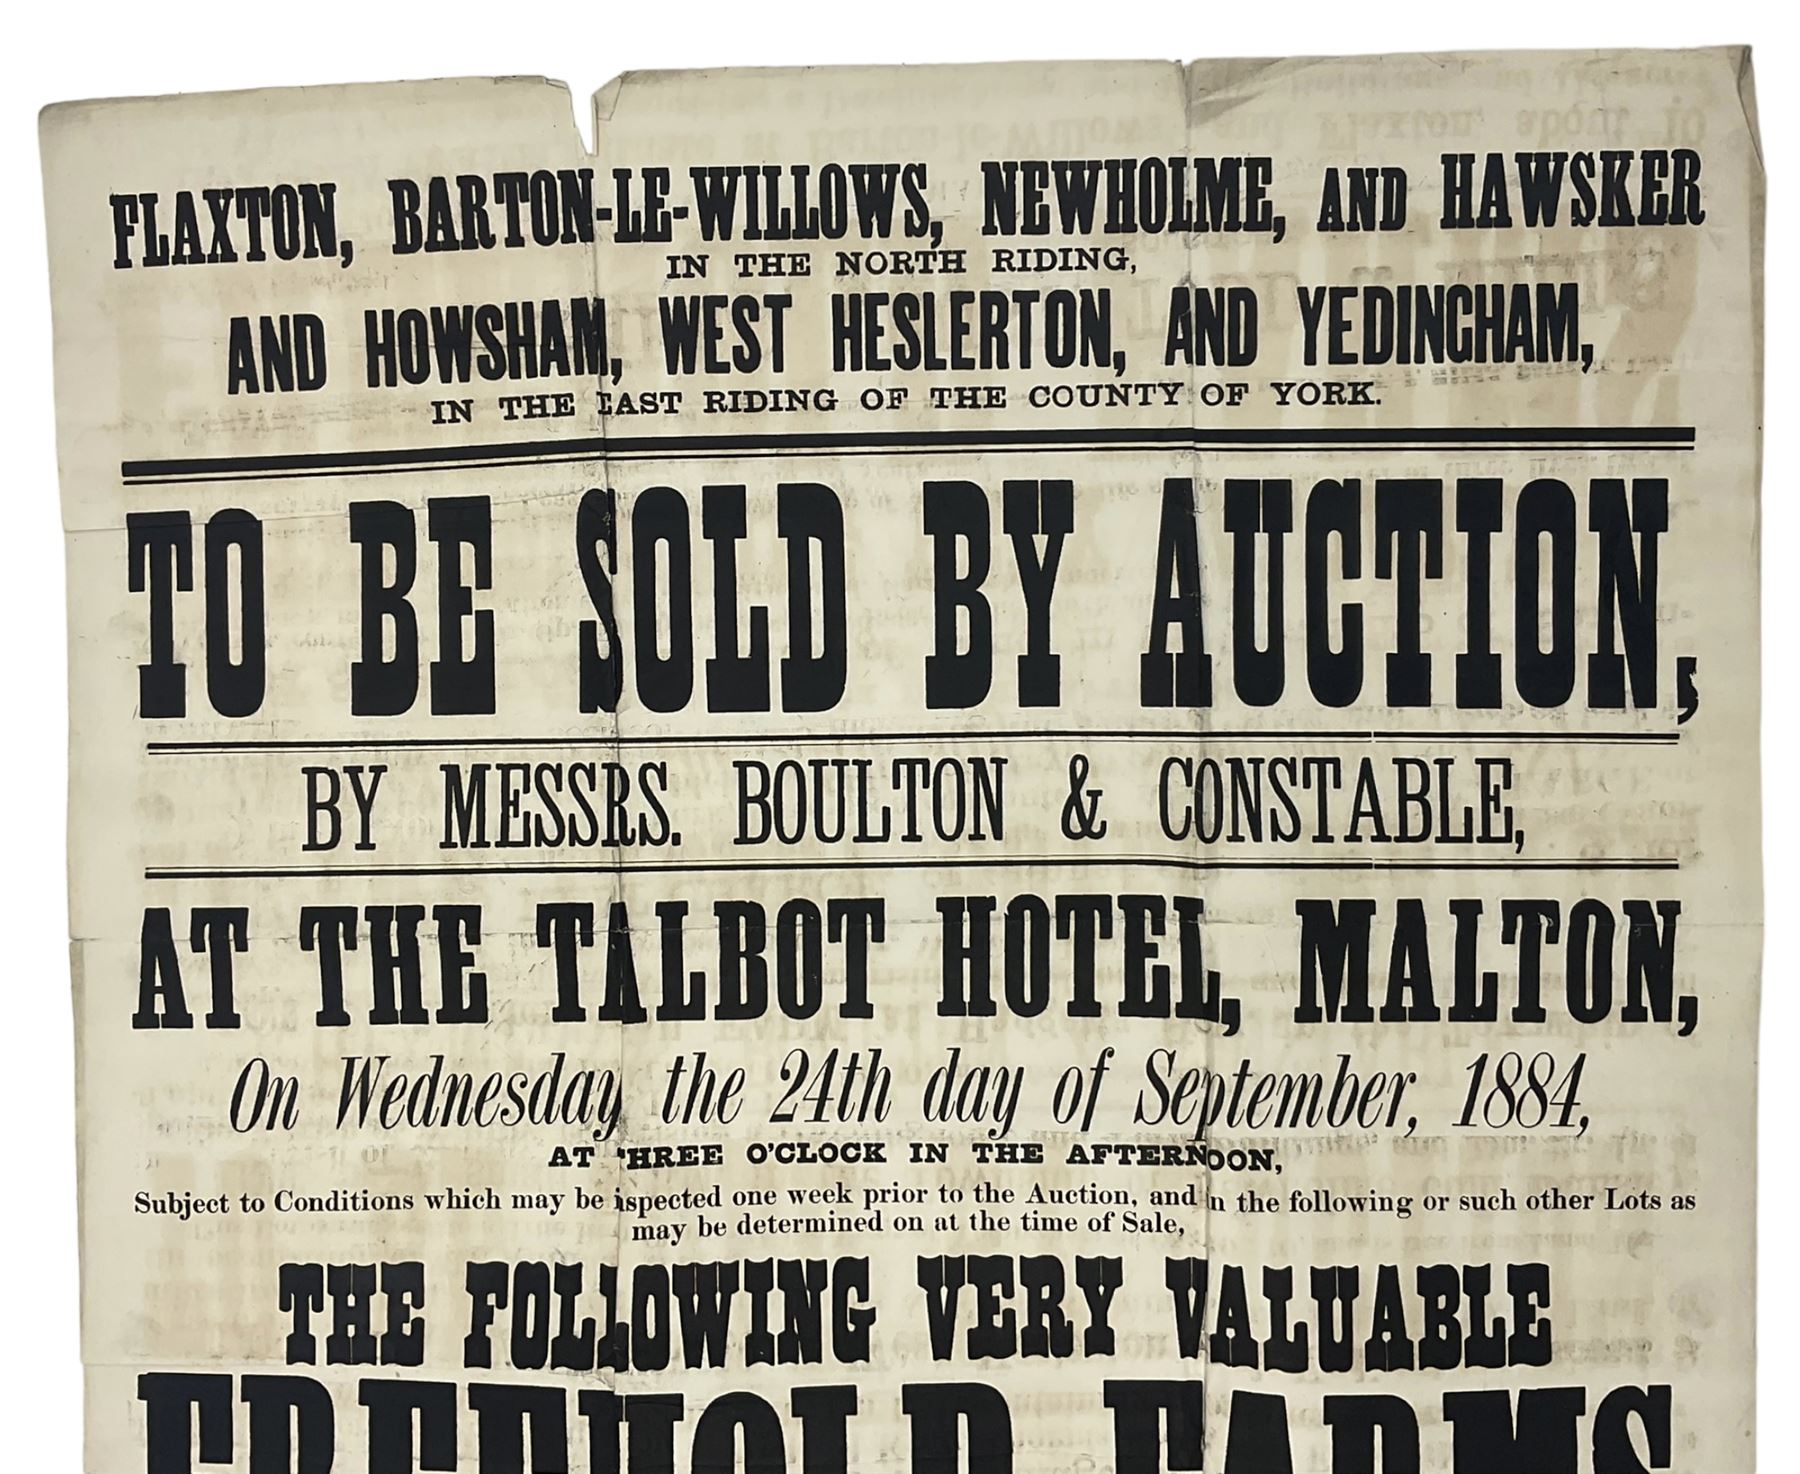 Auction poster for the sale of farms and land in Barton le Willows - Image 2 of 2